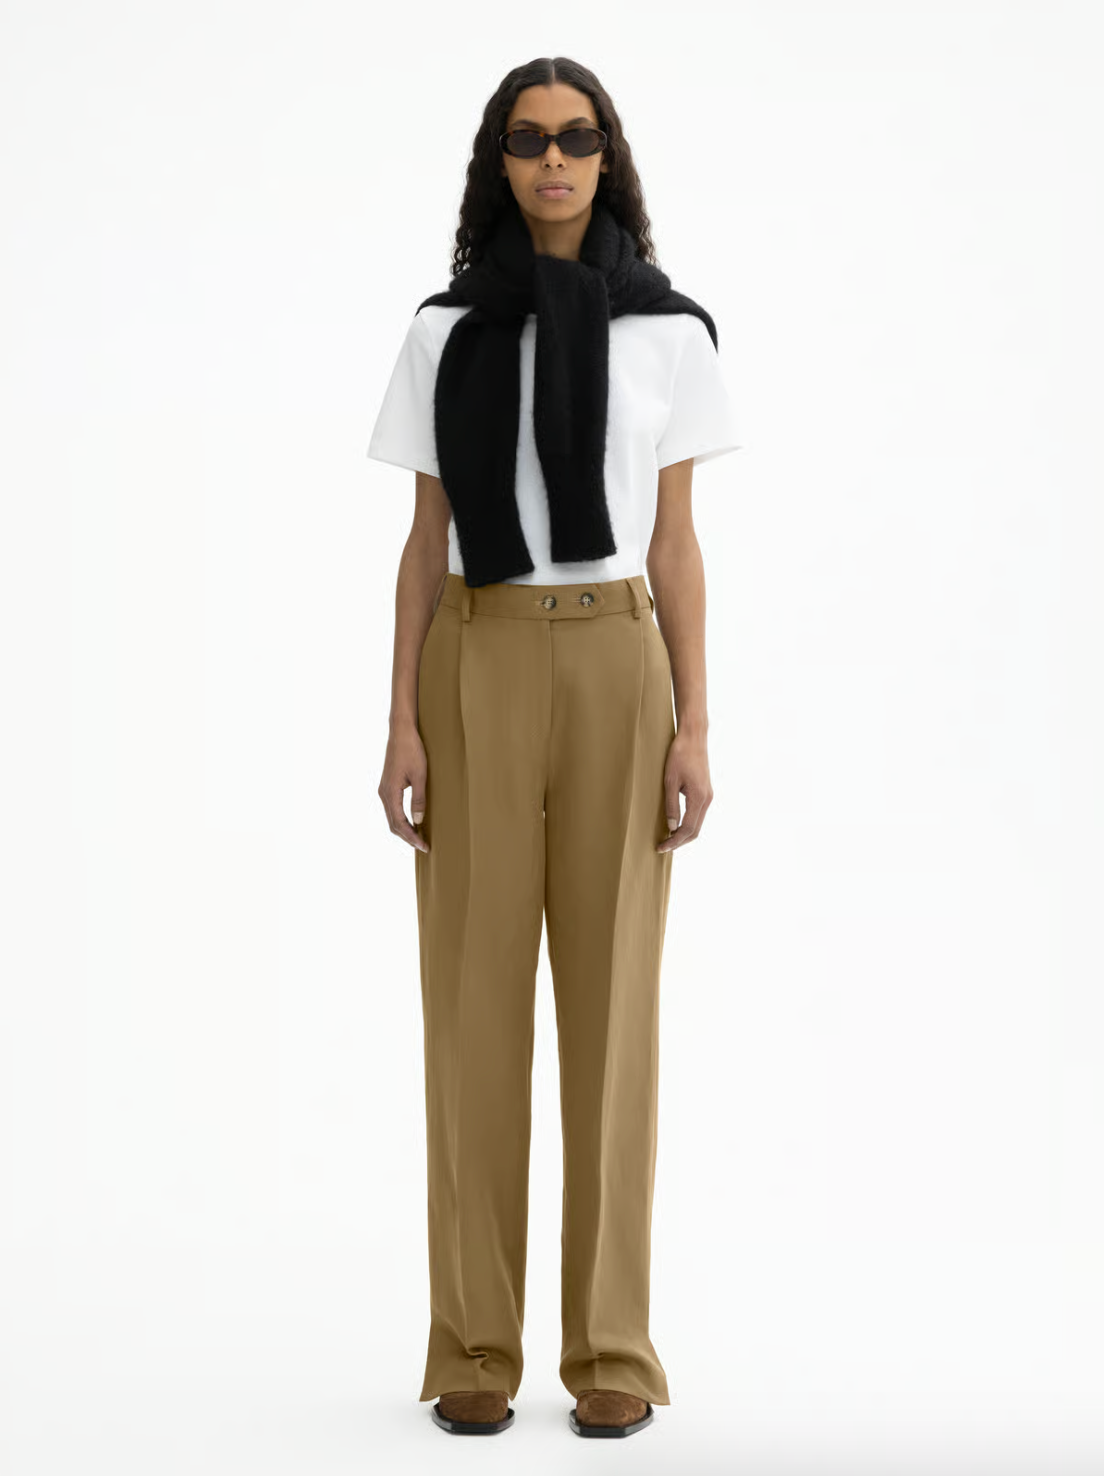 PLEATED TROUSERS: Warm Taupe